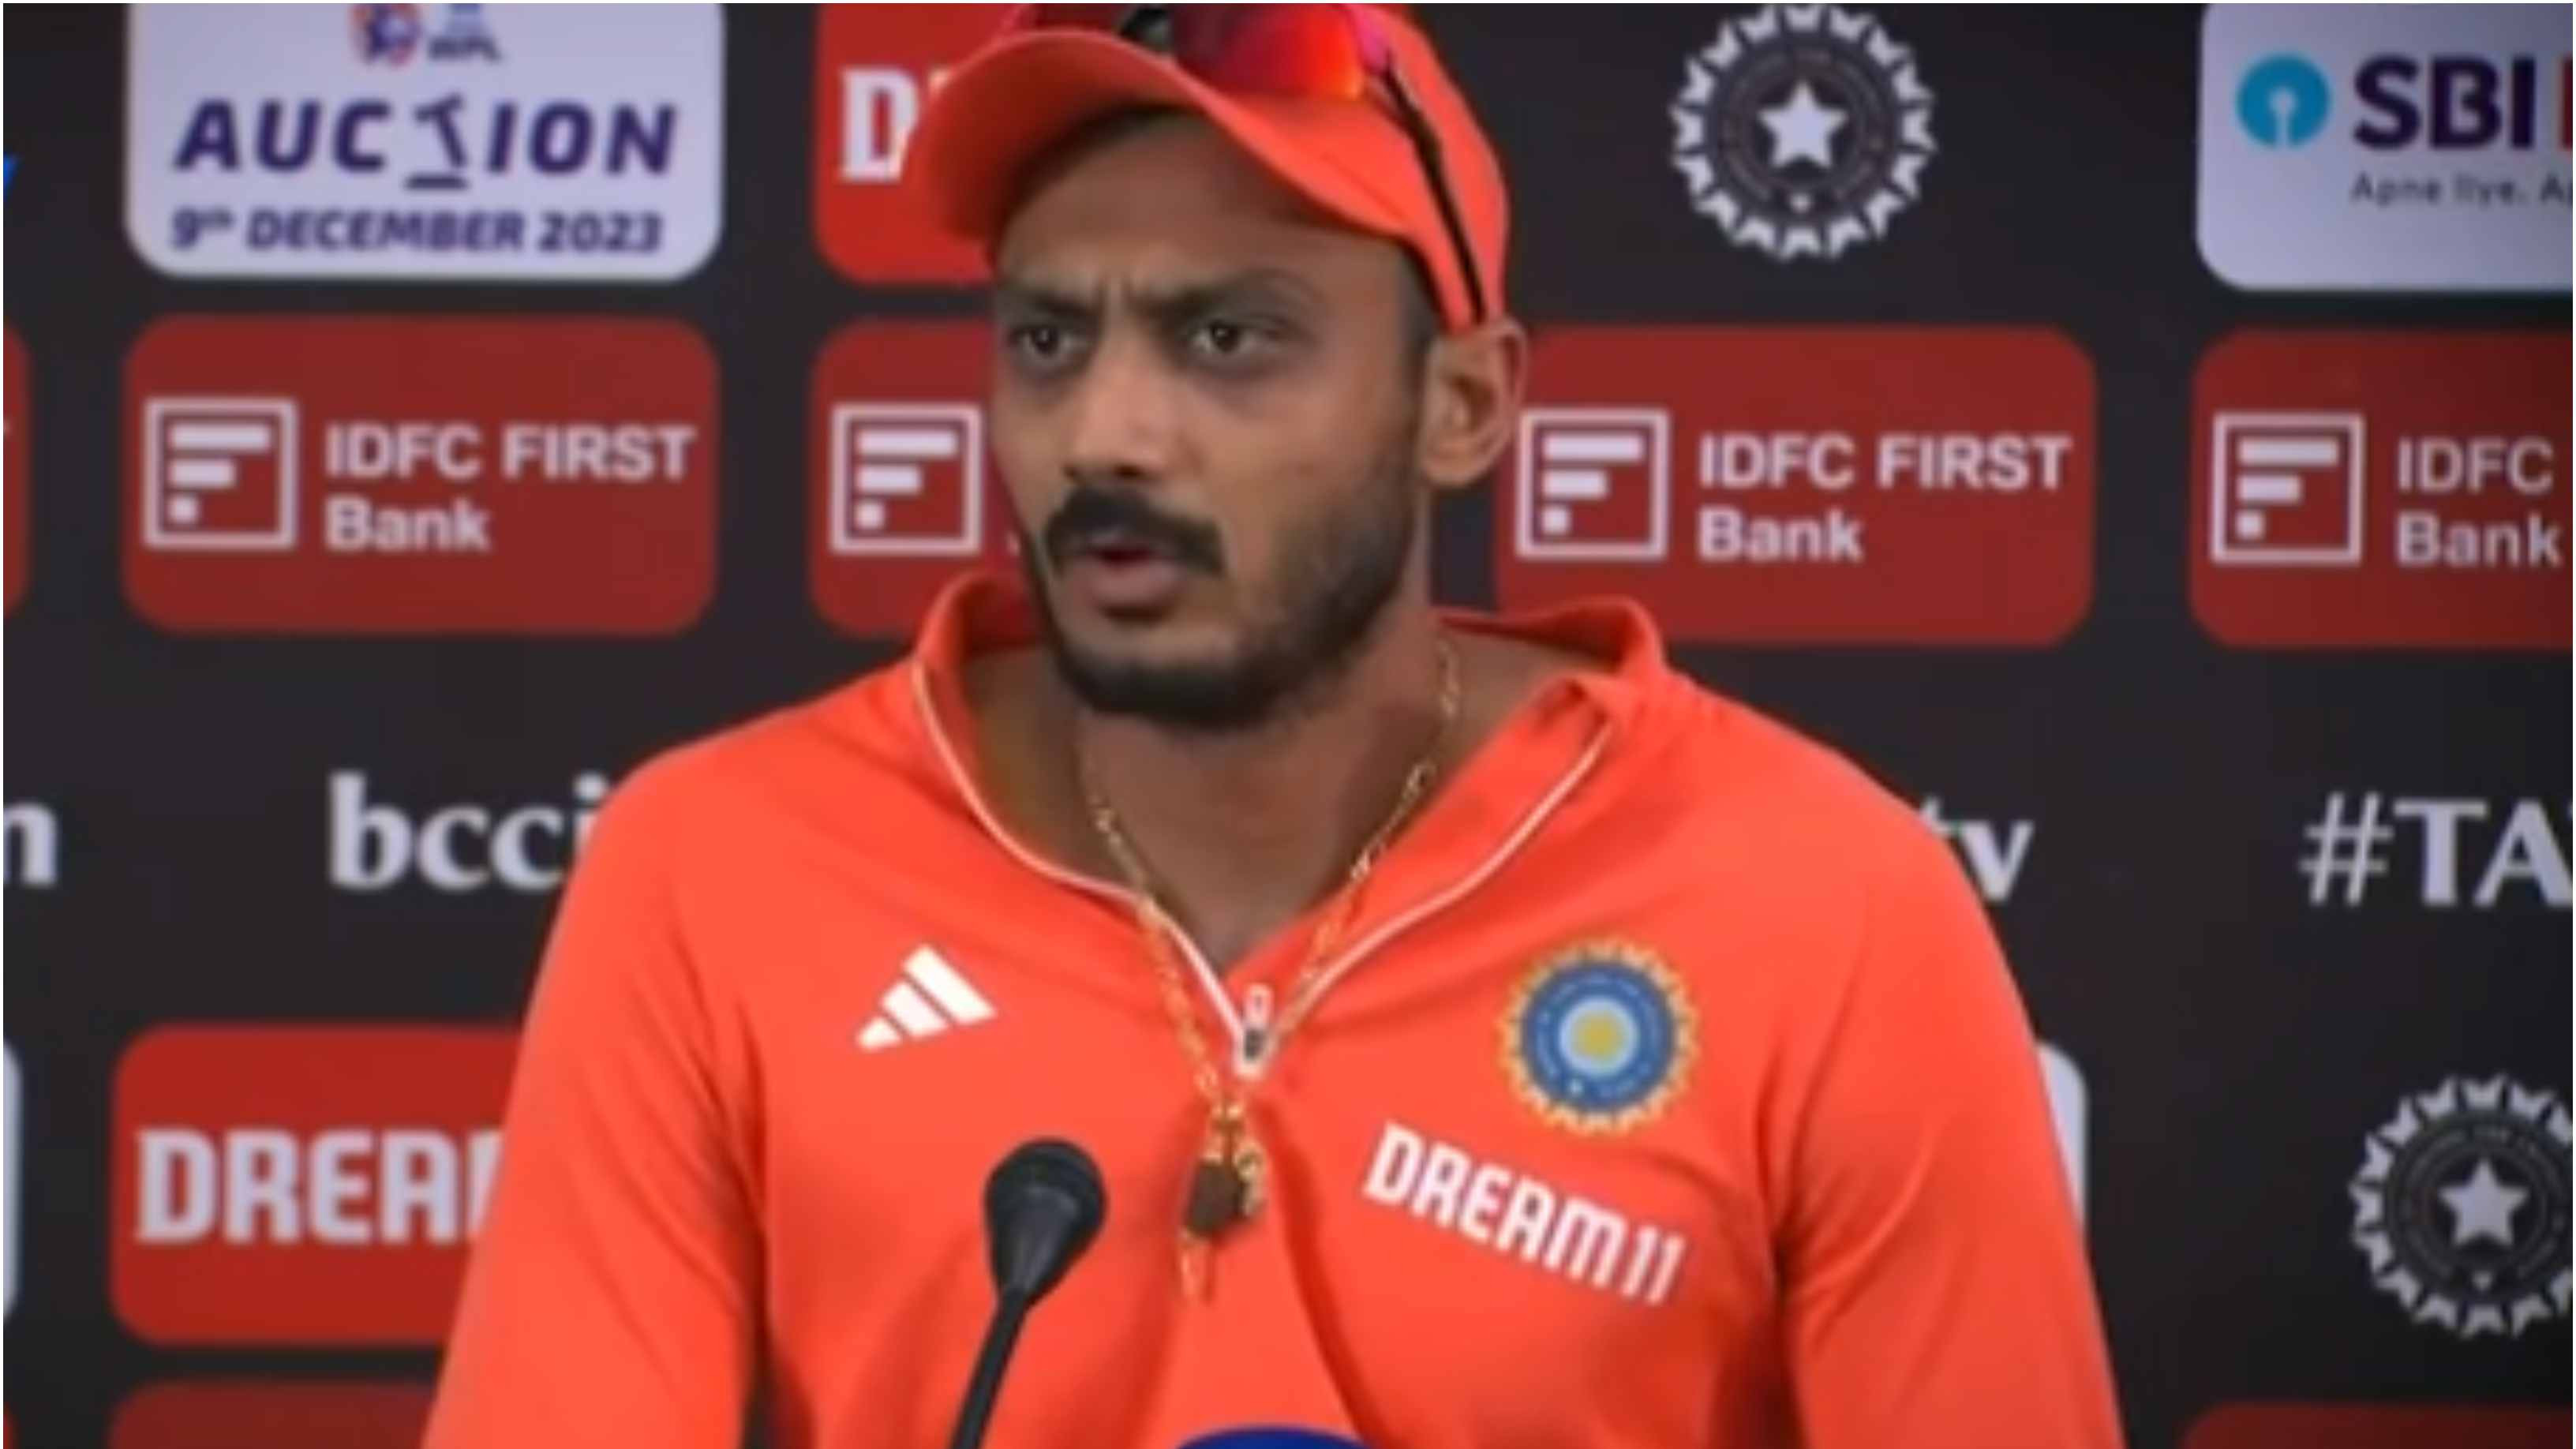 IND v AUS 2023: Akshar Patel admits being “upset” after missing out on playing home World Cup due to injury